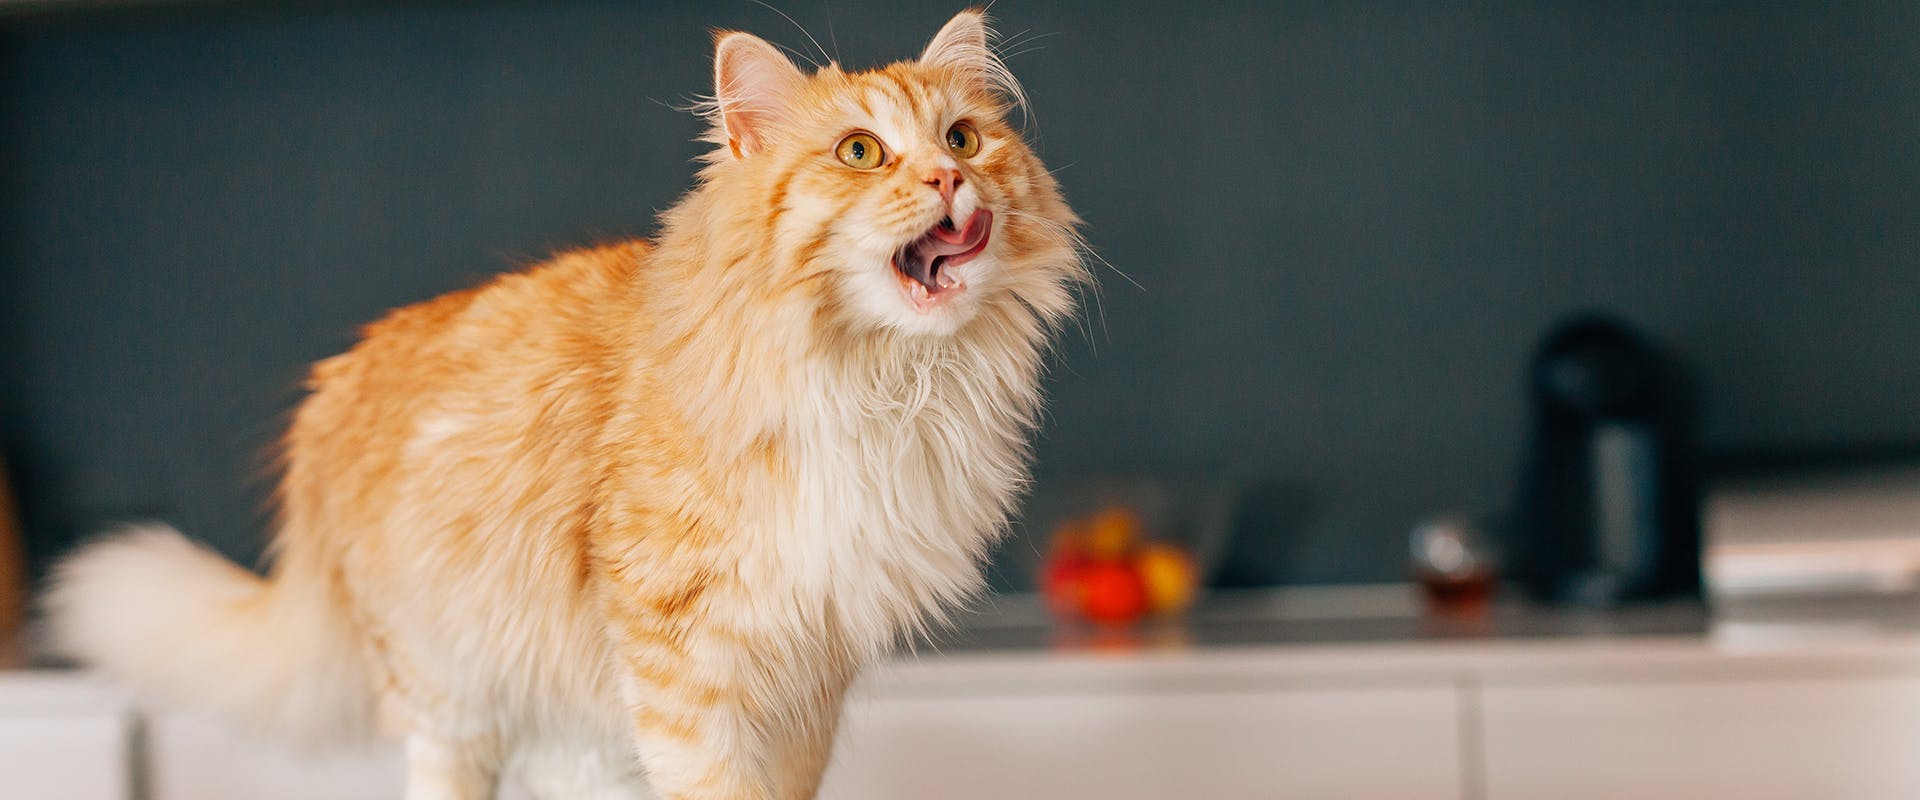 A fluffy ginger cat standing on a kitchen worktop 